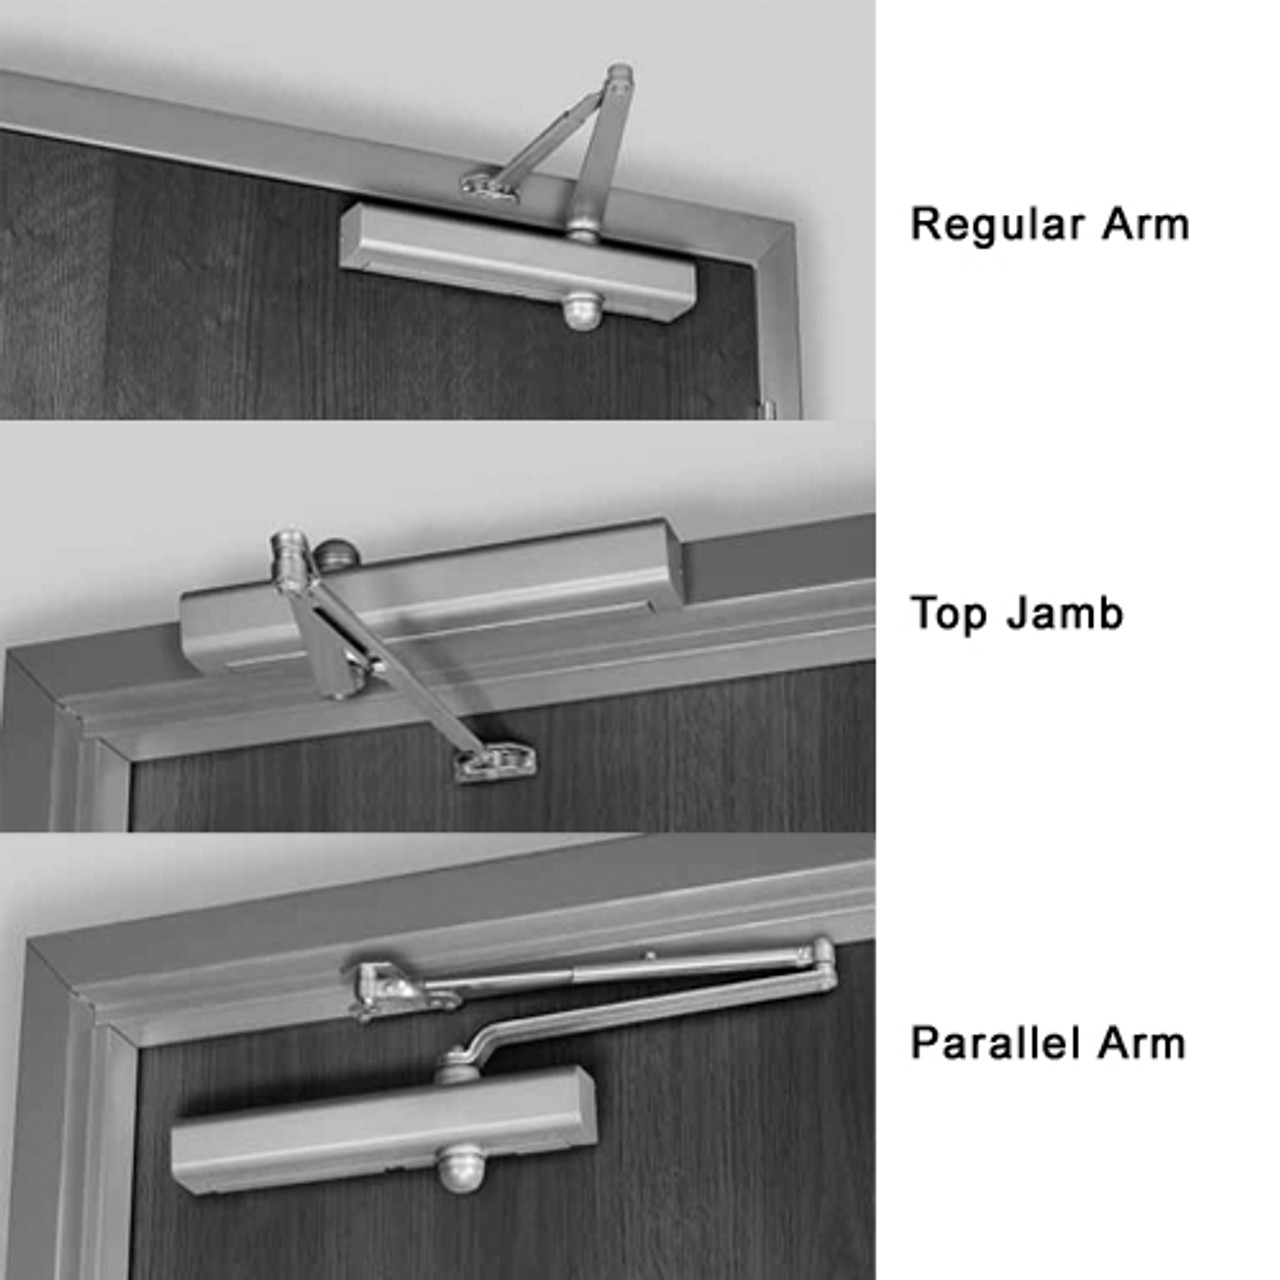 8301H-694 Norton 8000 Series Hold Open Door Closers with Regular Parallel and Top Jamb to 2-3/4 inch Reveal in Medium Amber Finish